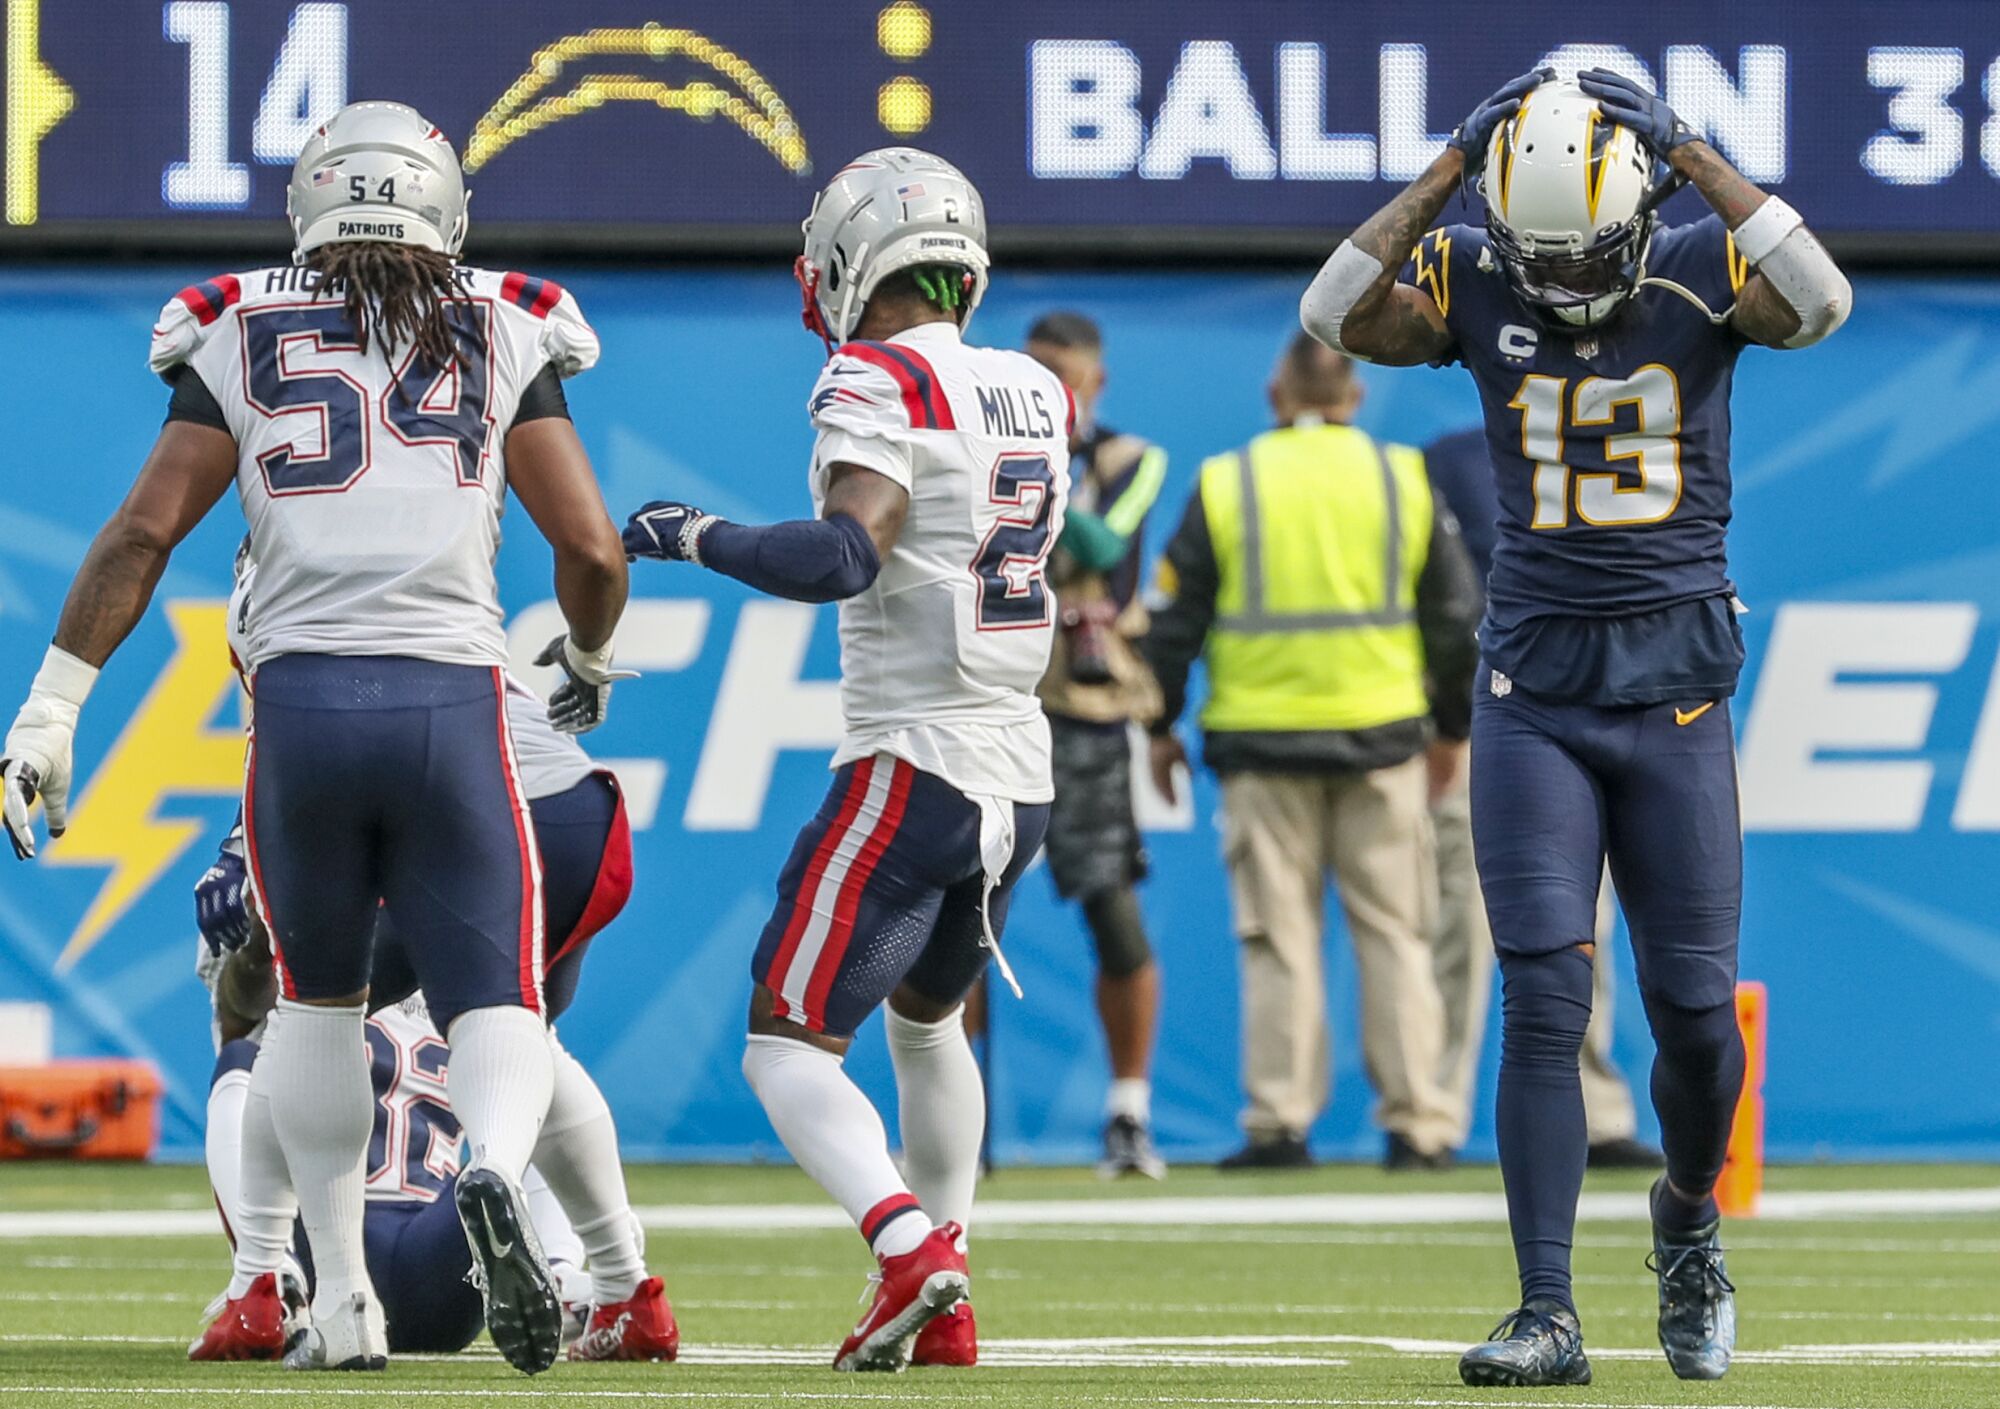 Chargers wide receiver Keenan Allen shows frustration after failing to catch a pass from quarterback Justin Herbert.